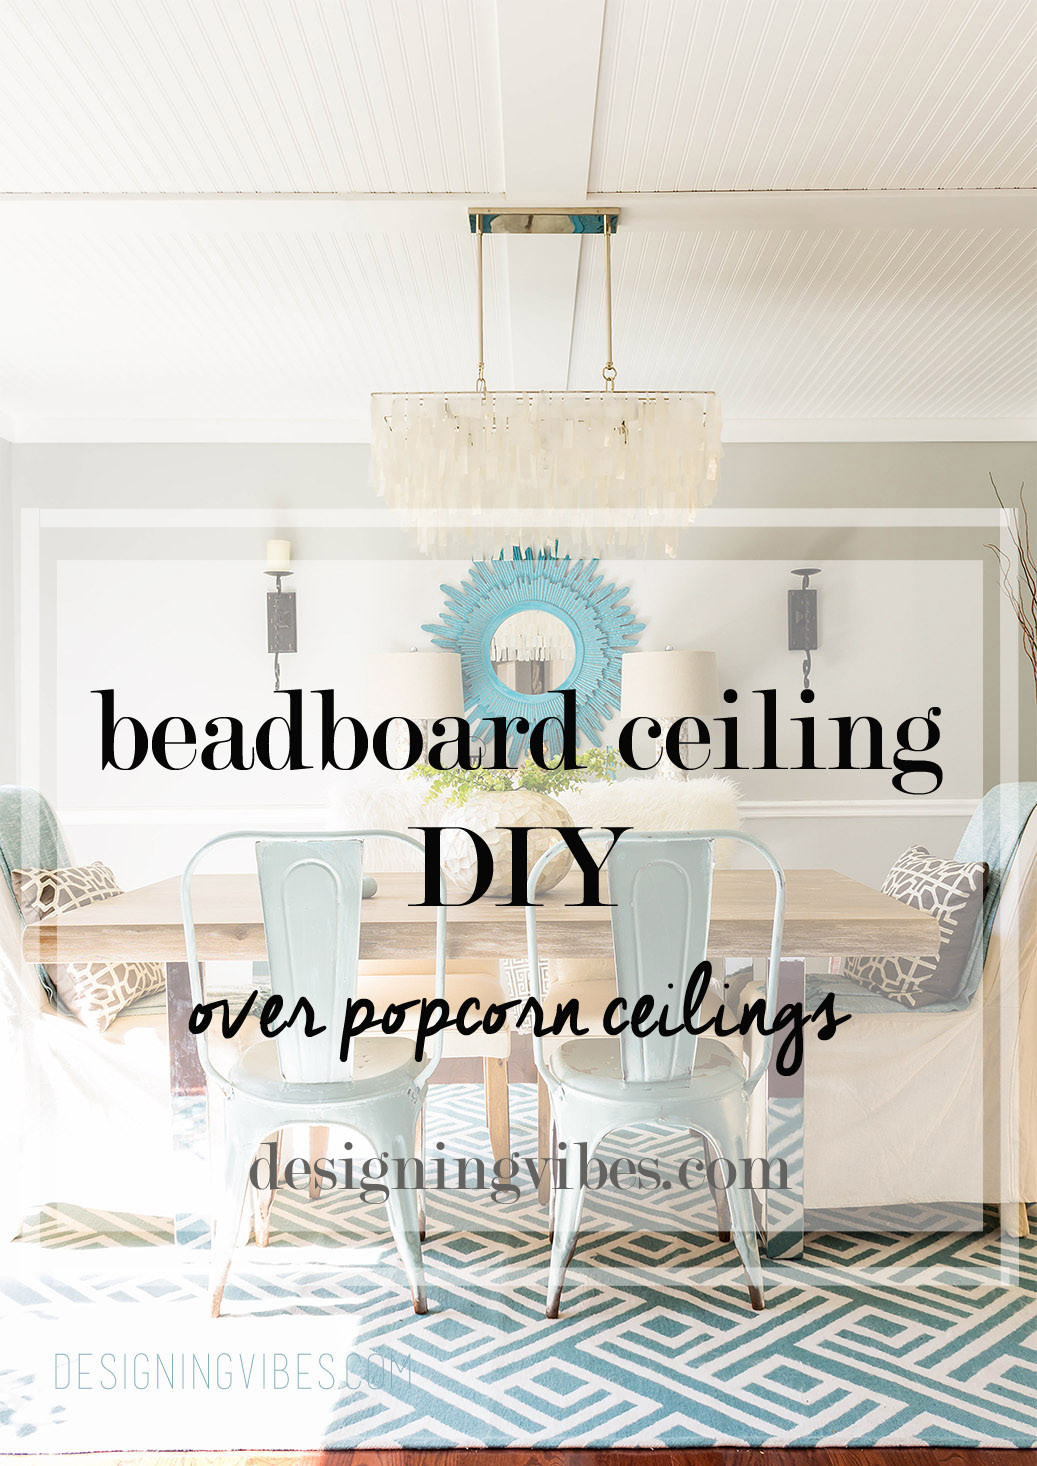 DIY Plank Ceiling
 How to Cover Popcorn Ceiling with Beadboard Planks DIY